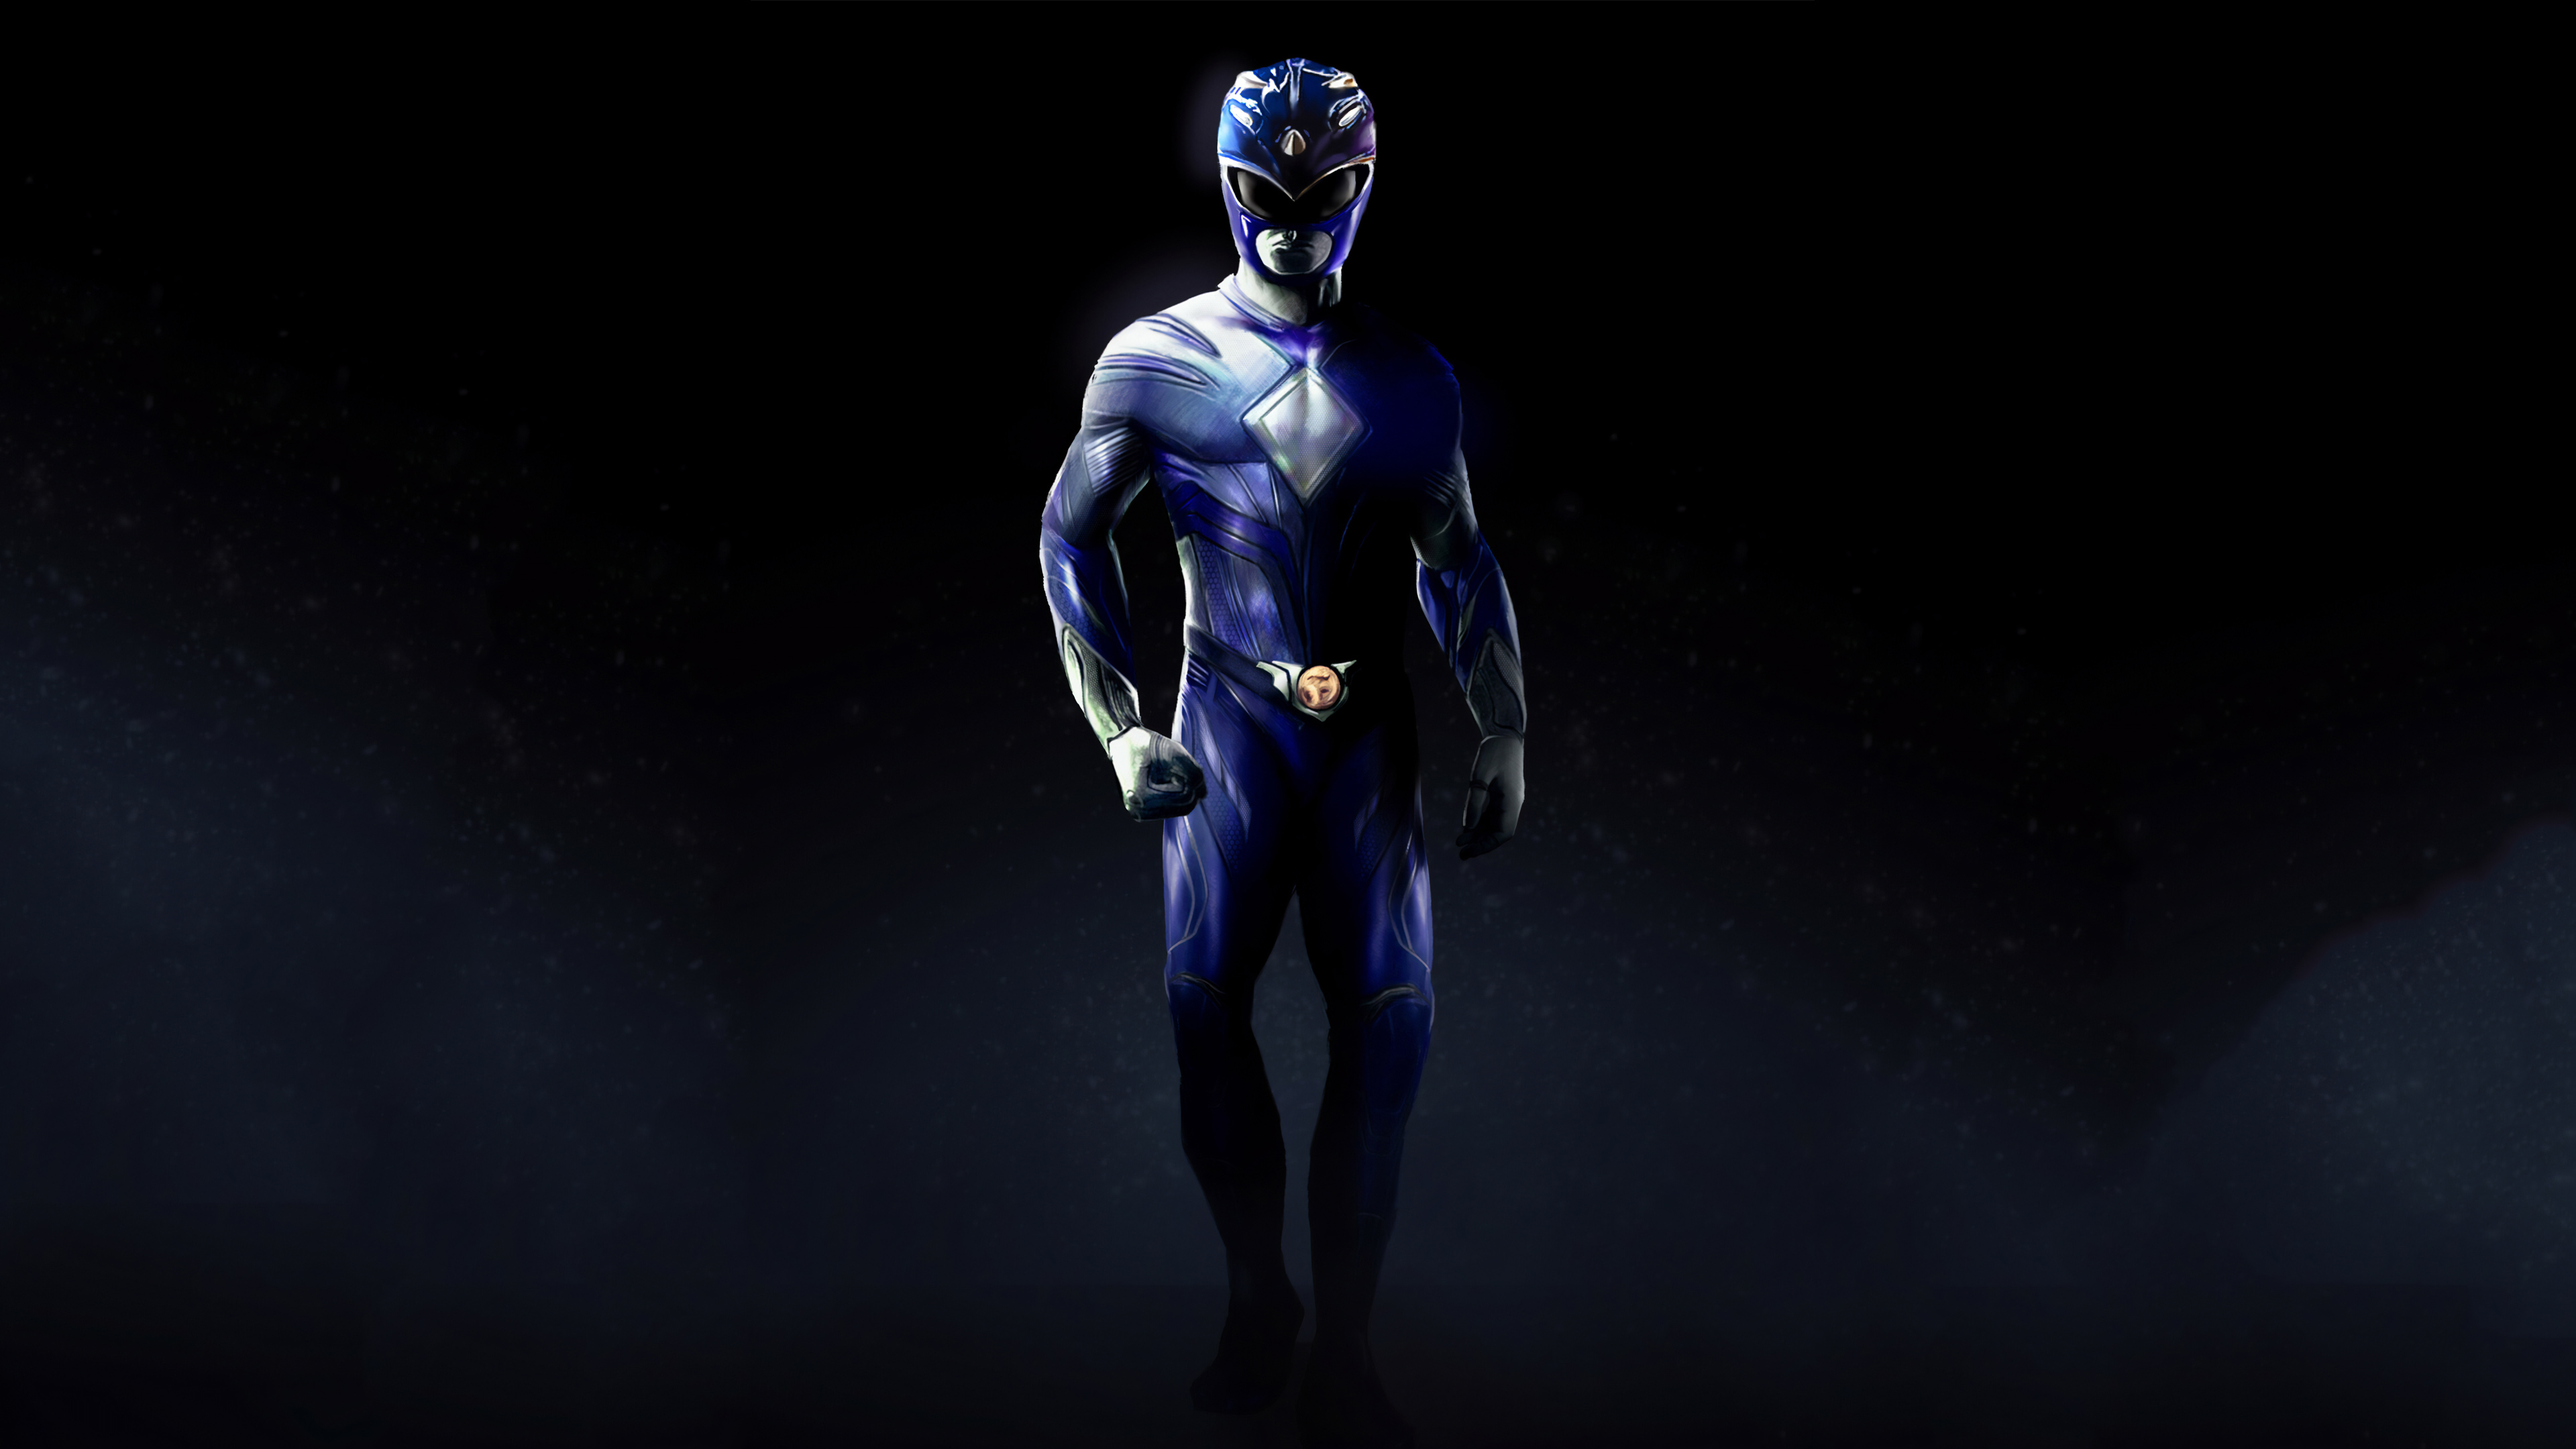 Power Rangers  Media Category  Wallpapers